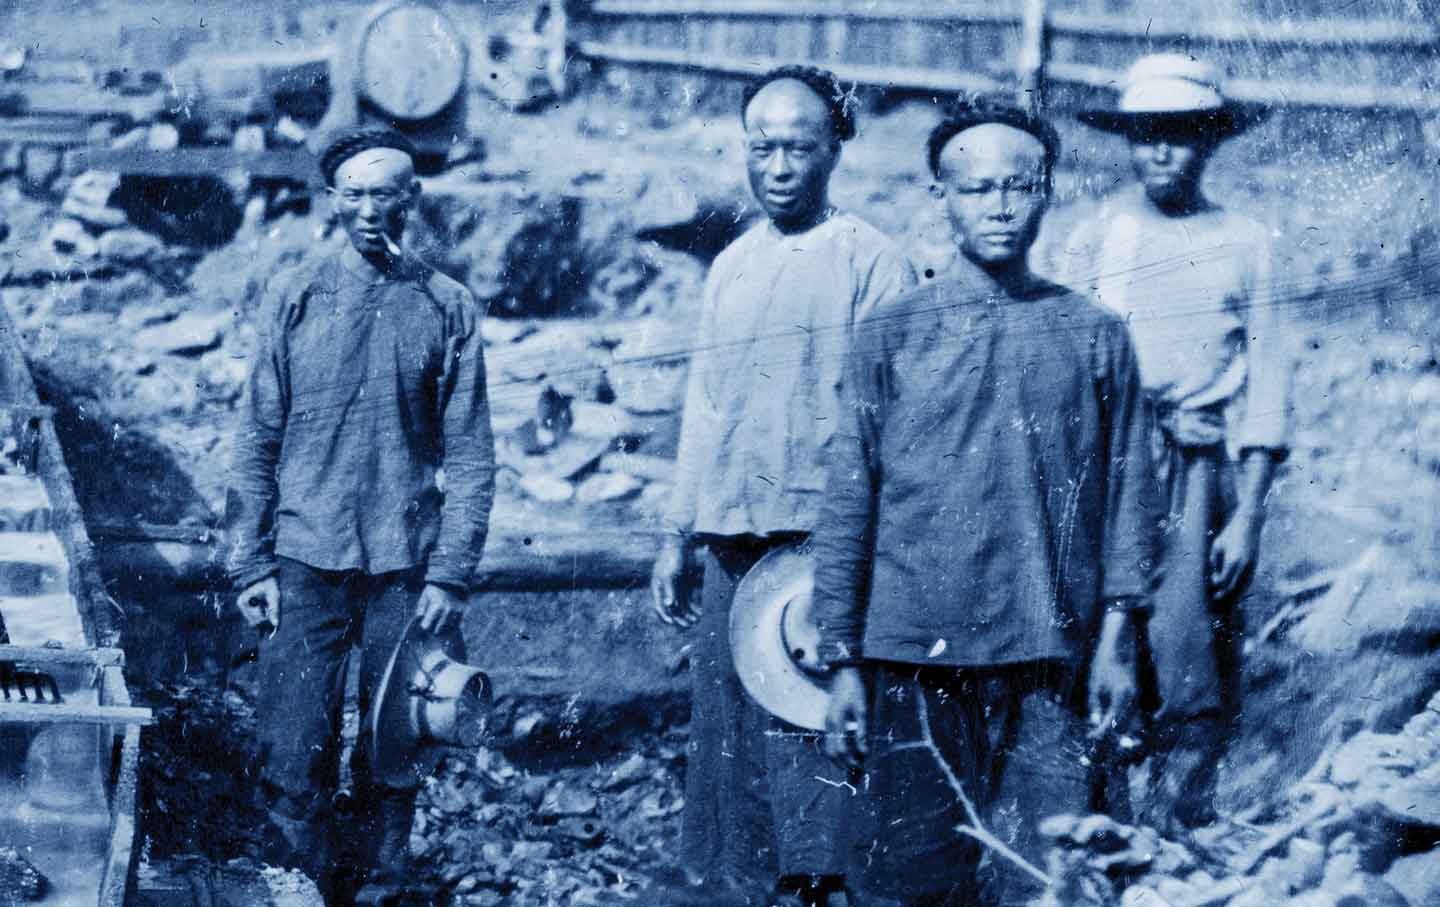 Chinese miners in California, c. 1862